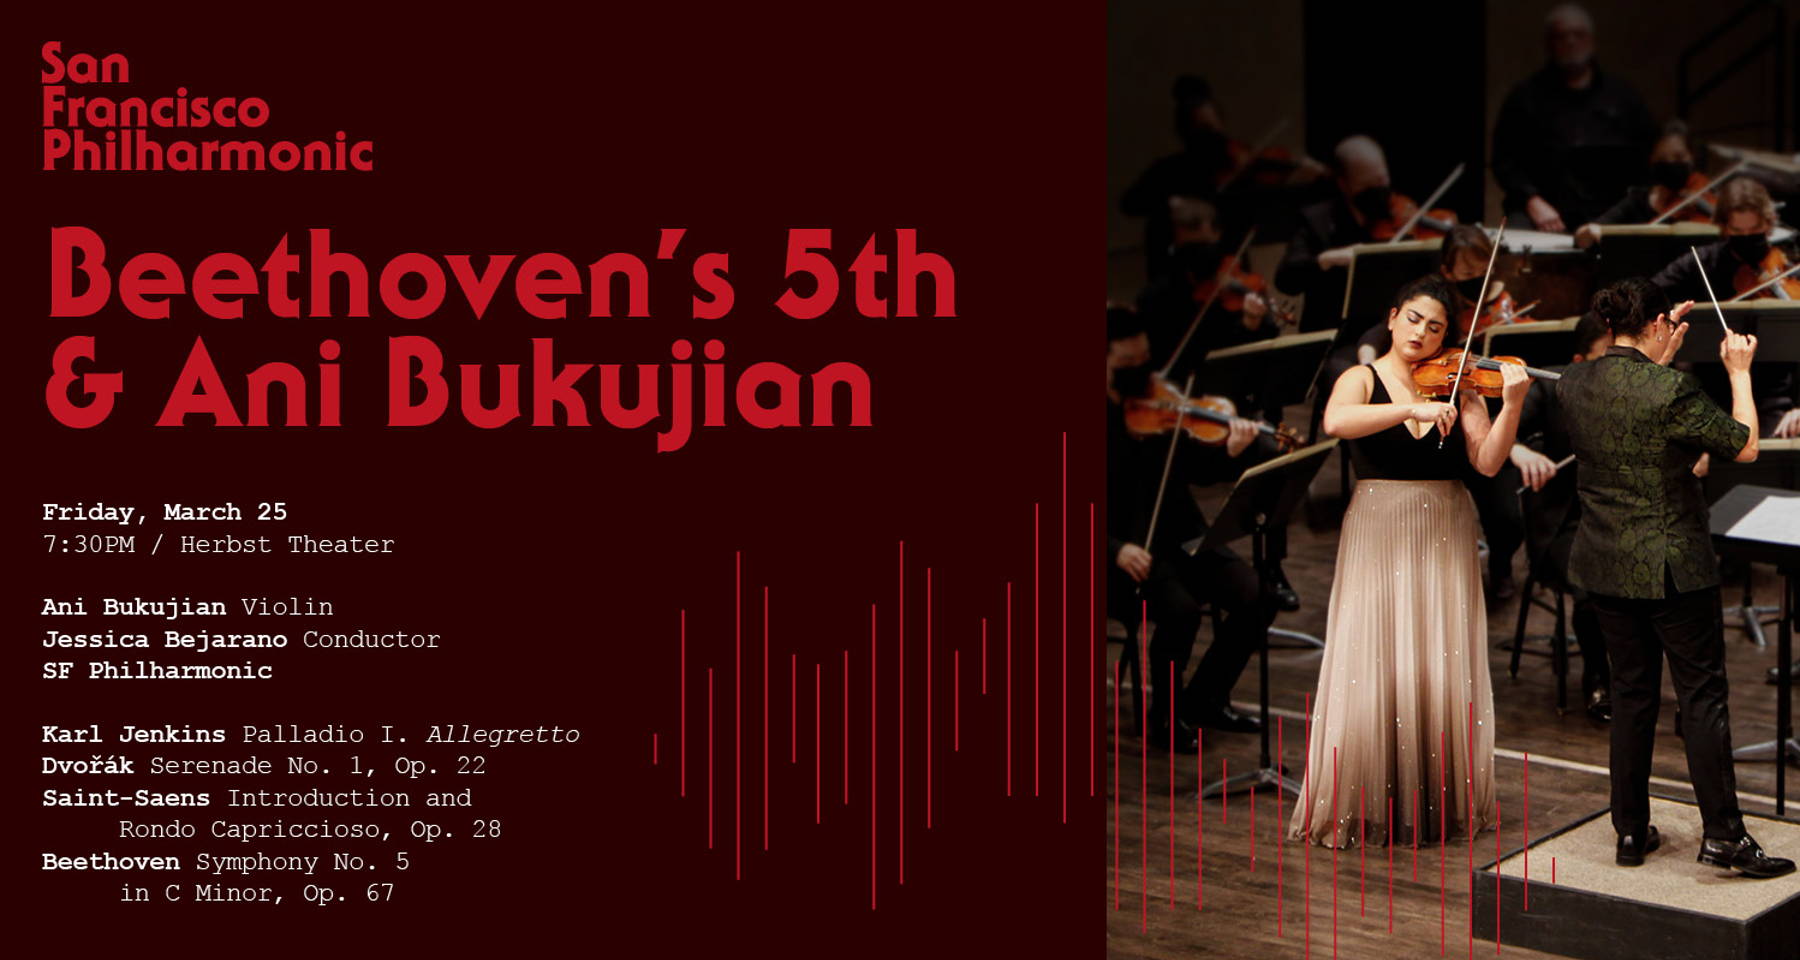 SF Philharmonic Presents Beethoven’s 5th & Ani Bukujian at the Herbst Theatre